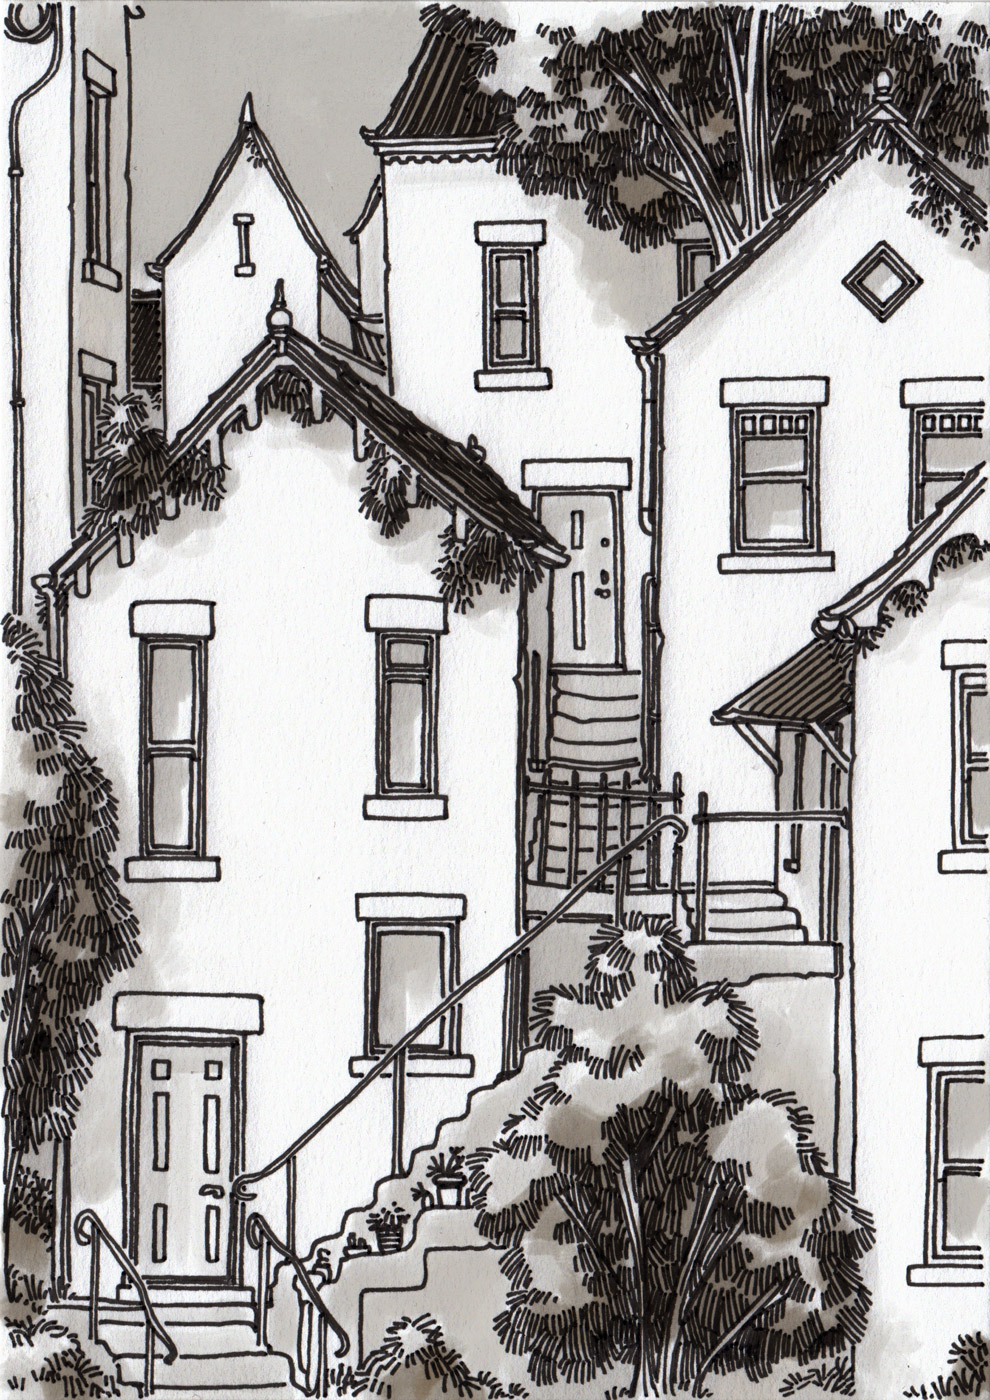 Houses in elevation, staggered up a hillside, with steps winding up between them. Trees poke out in various places.